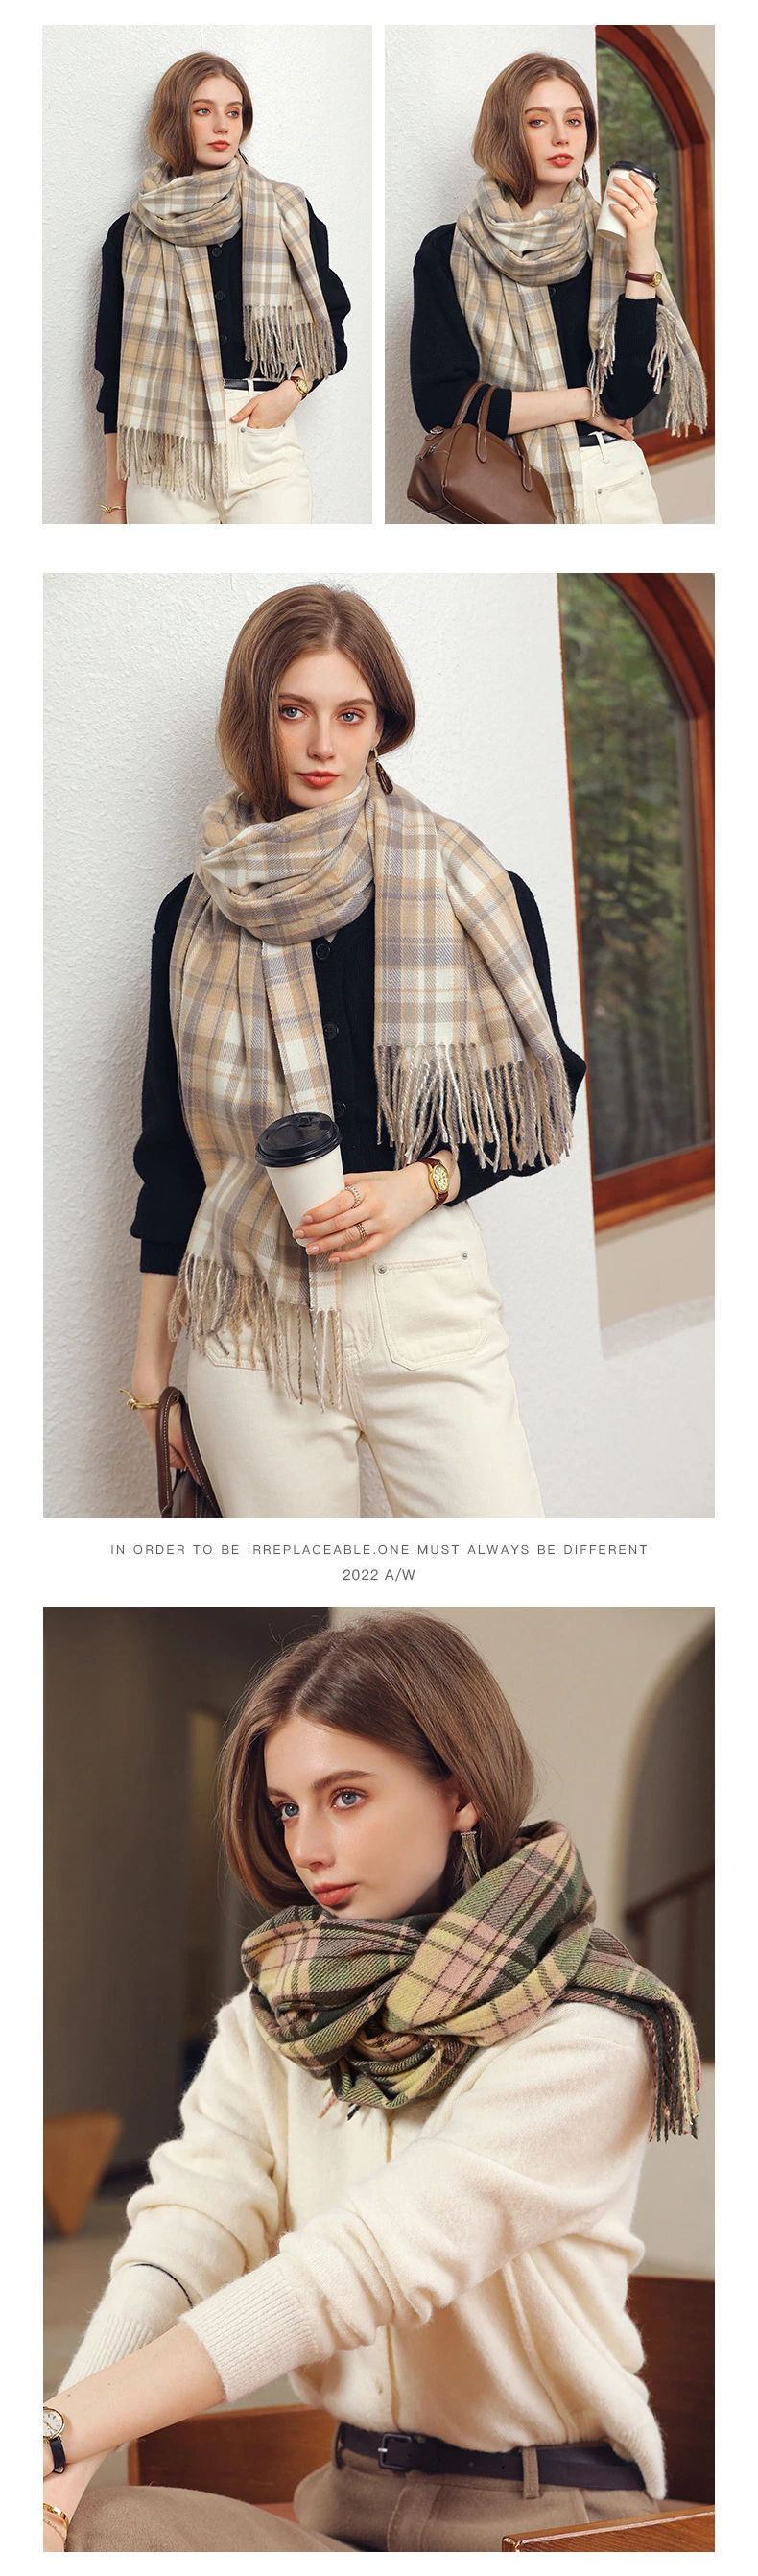 Women&prime;s Autumn and Winter Colorful Plaid Shawl Thickening Warm Fringe Warm Soft Large Blanket Scarf